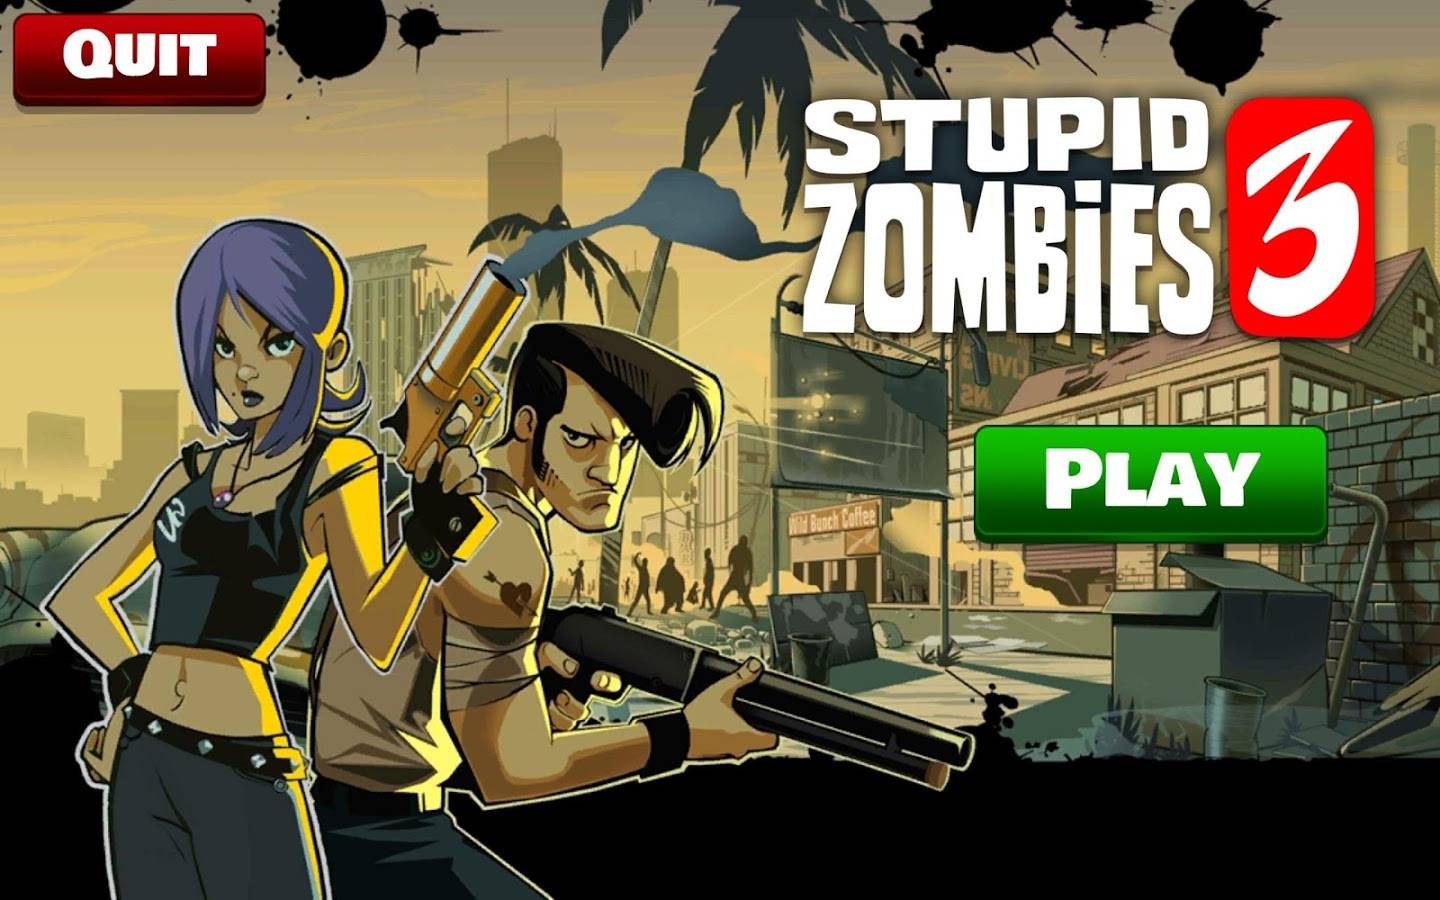 shoot-as-many-stupid-zombies-as-you-can-in-stupid-zombies-3-android-community